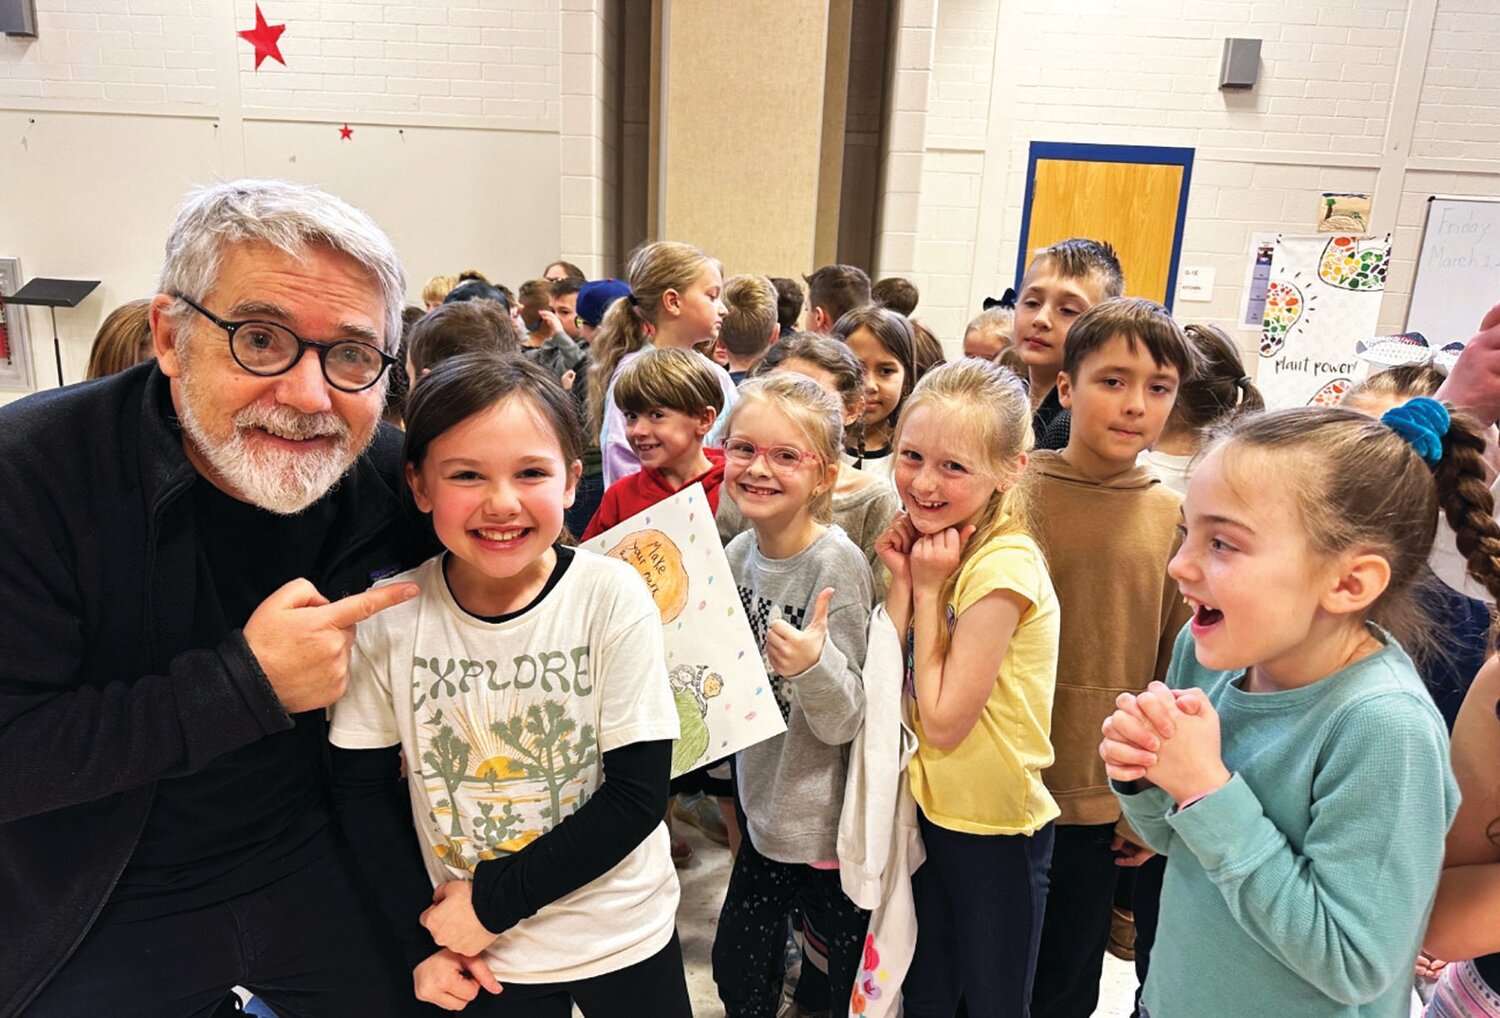 Illustrator Peter H. Reynolds dropped by Council Rock’s Churchville Elementary School last week to read his newest book, “The Reflection in Me,” and talk about some of his other favorite books during Read Across America Week.